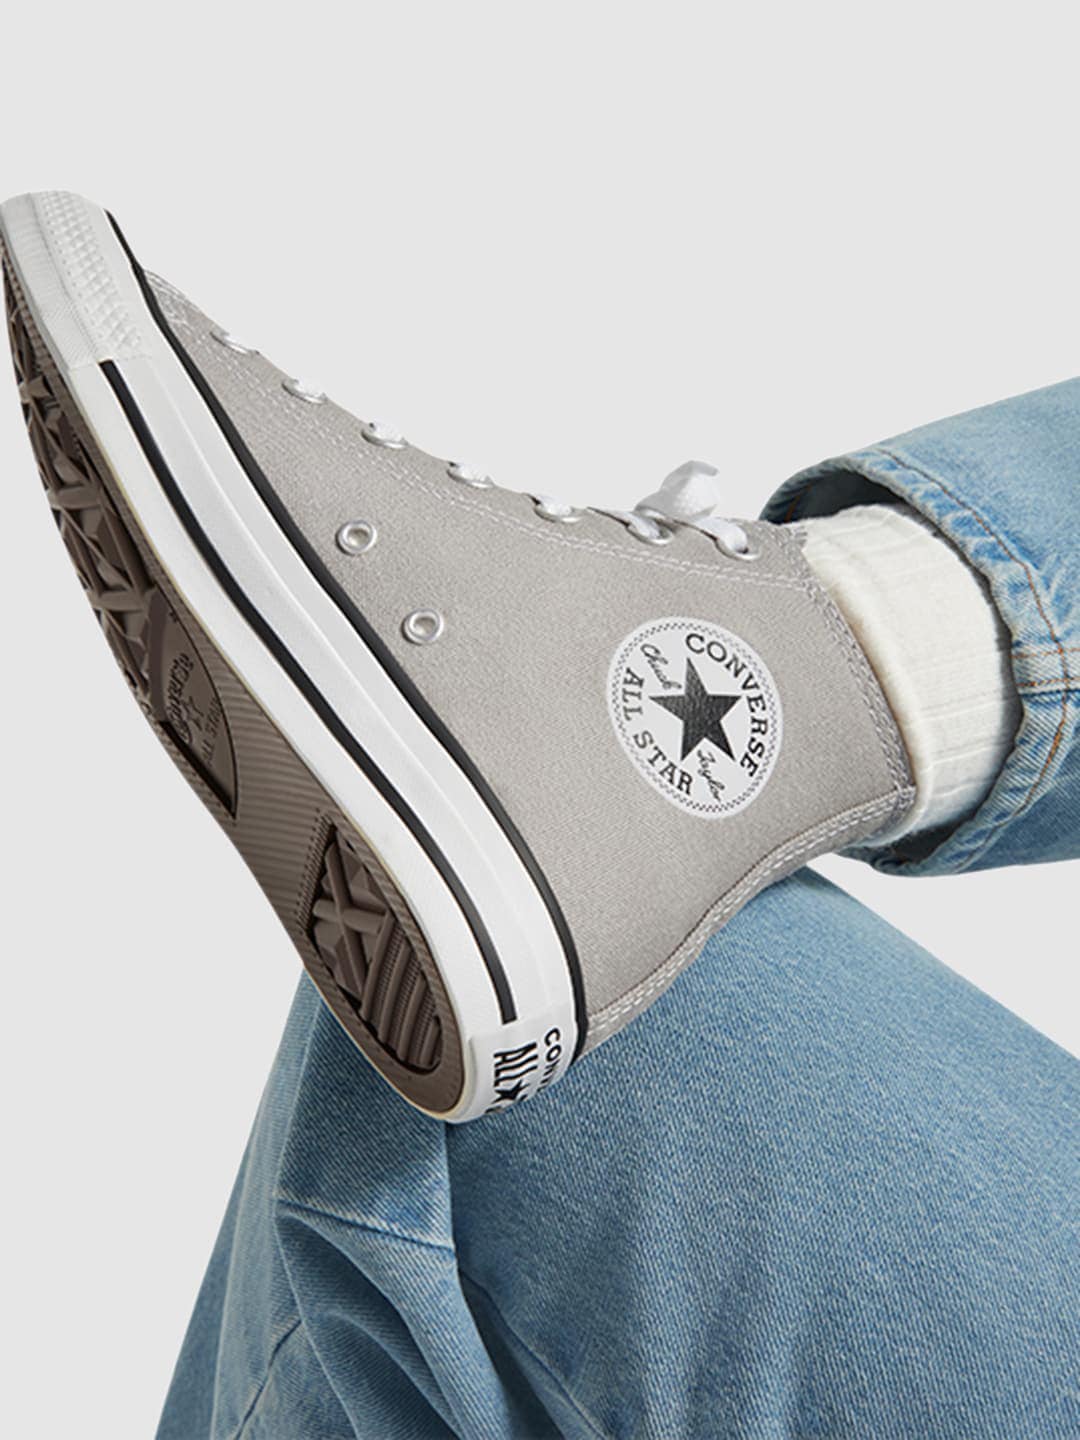 Converse Unisex Round Toe Canvas Sneakers